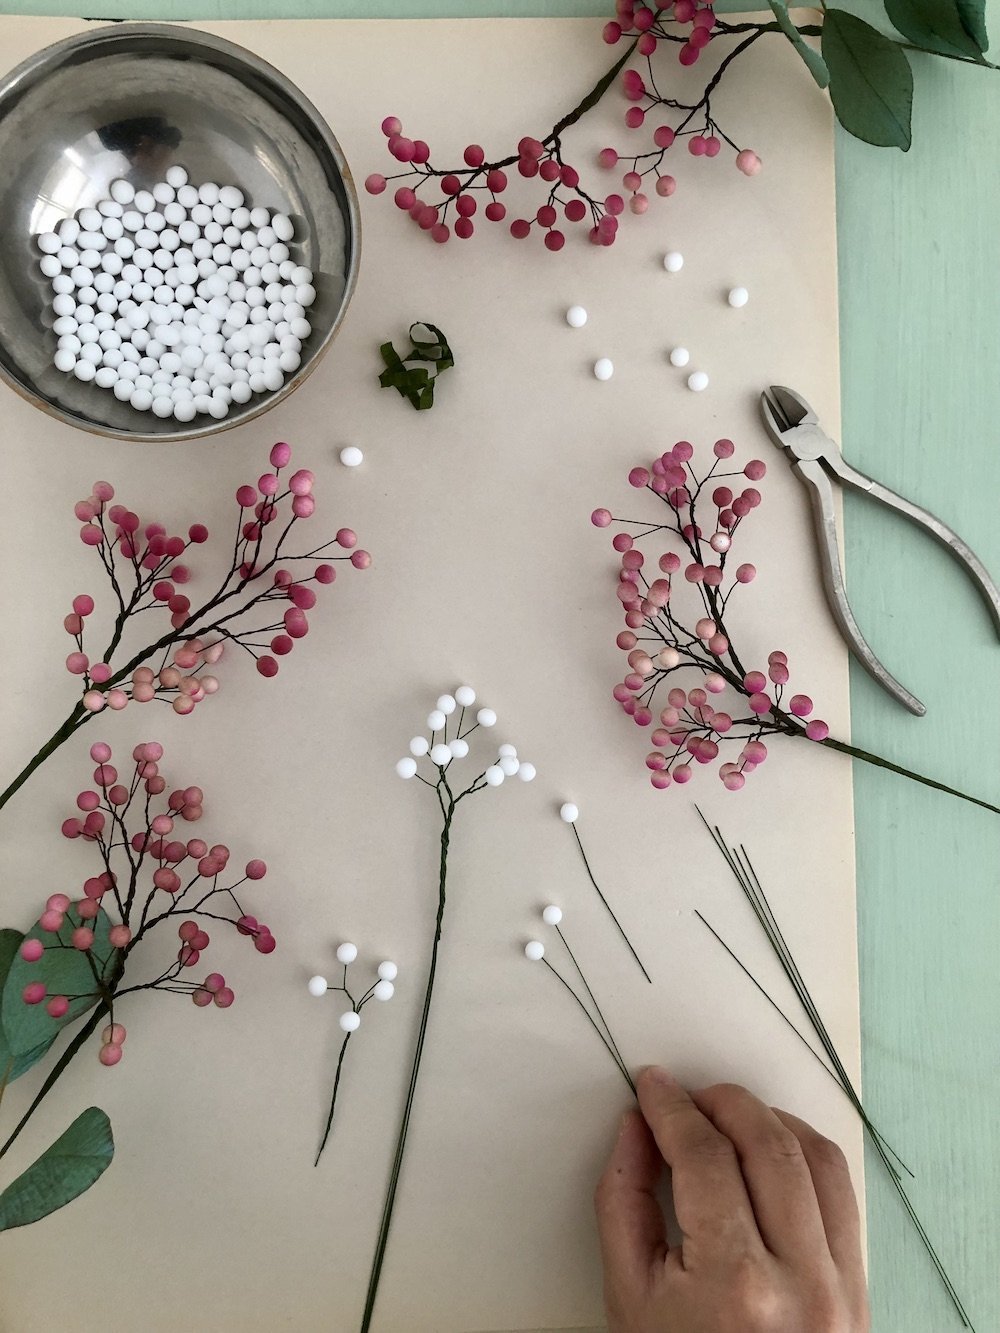 How+to+make+berry+and+seeded+sprigs+tutorial+cover+by+Crafted+to+Bloom+#paperflowers.jpg